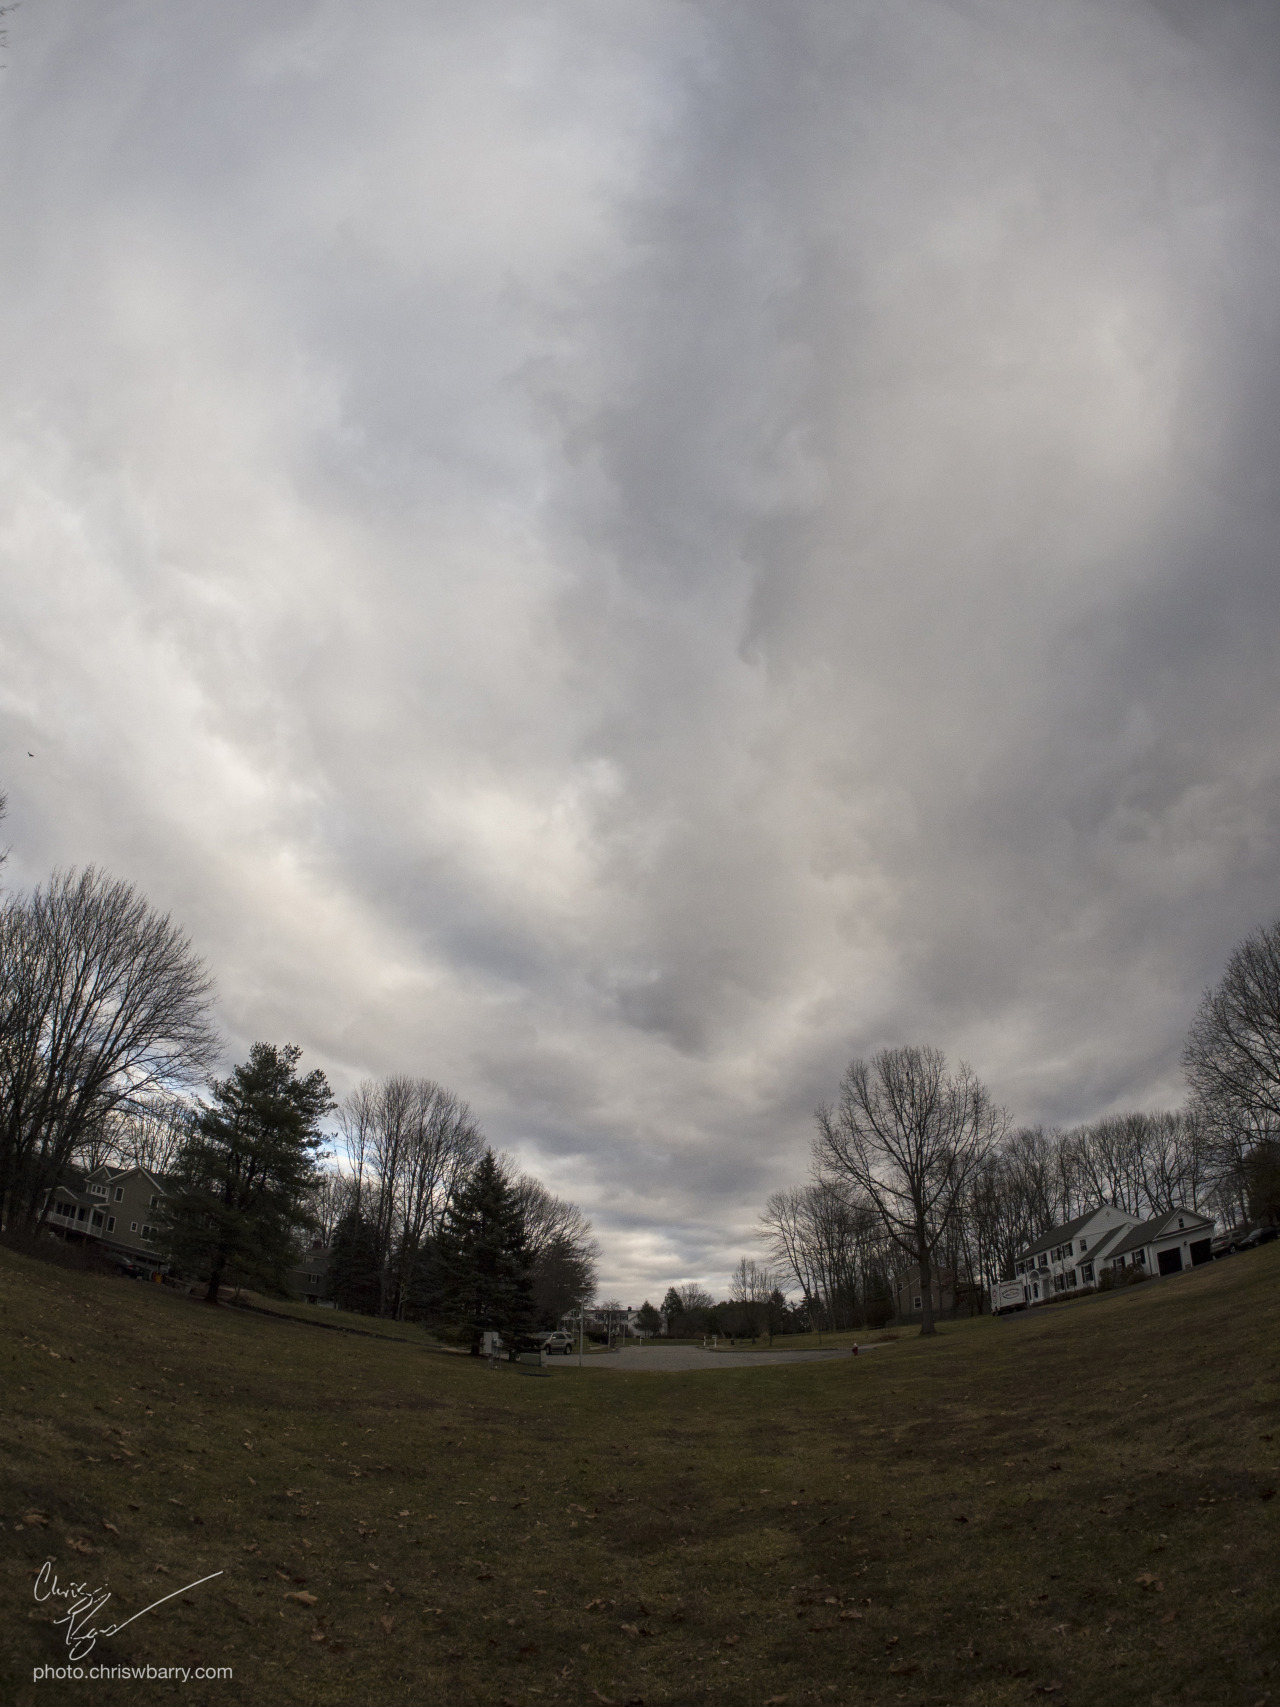 &hellip;so the next few pictures will be me messing around with fisheye